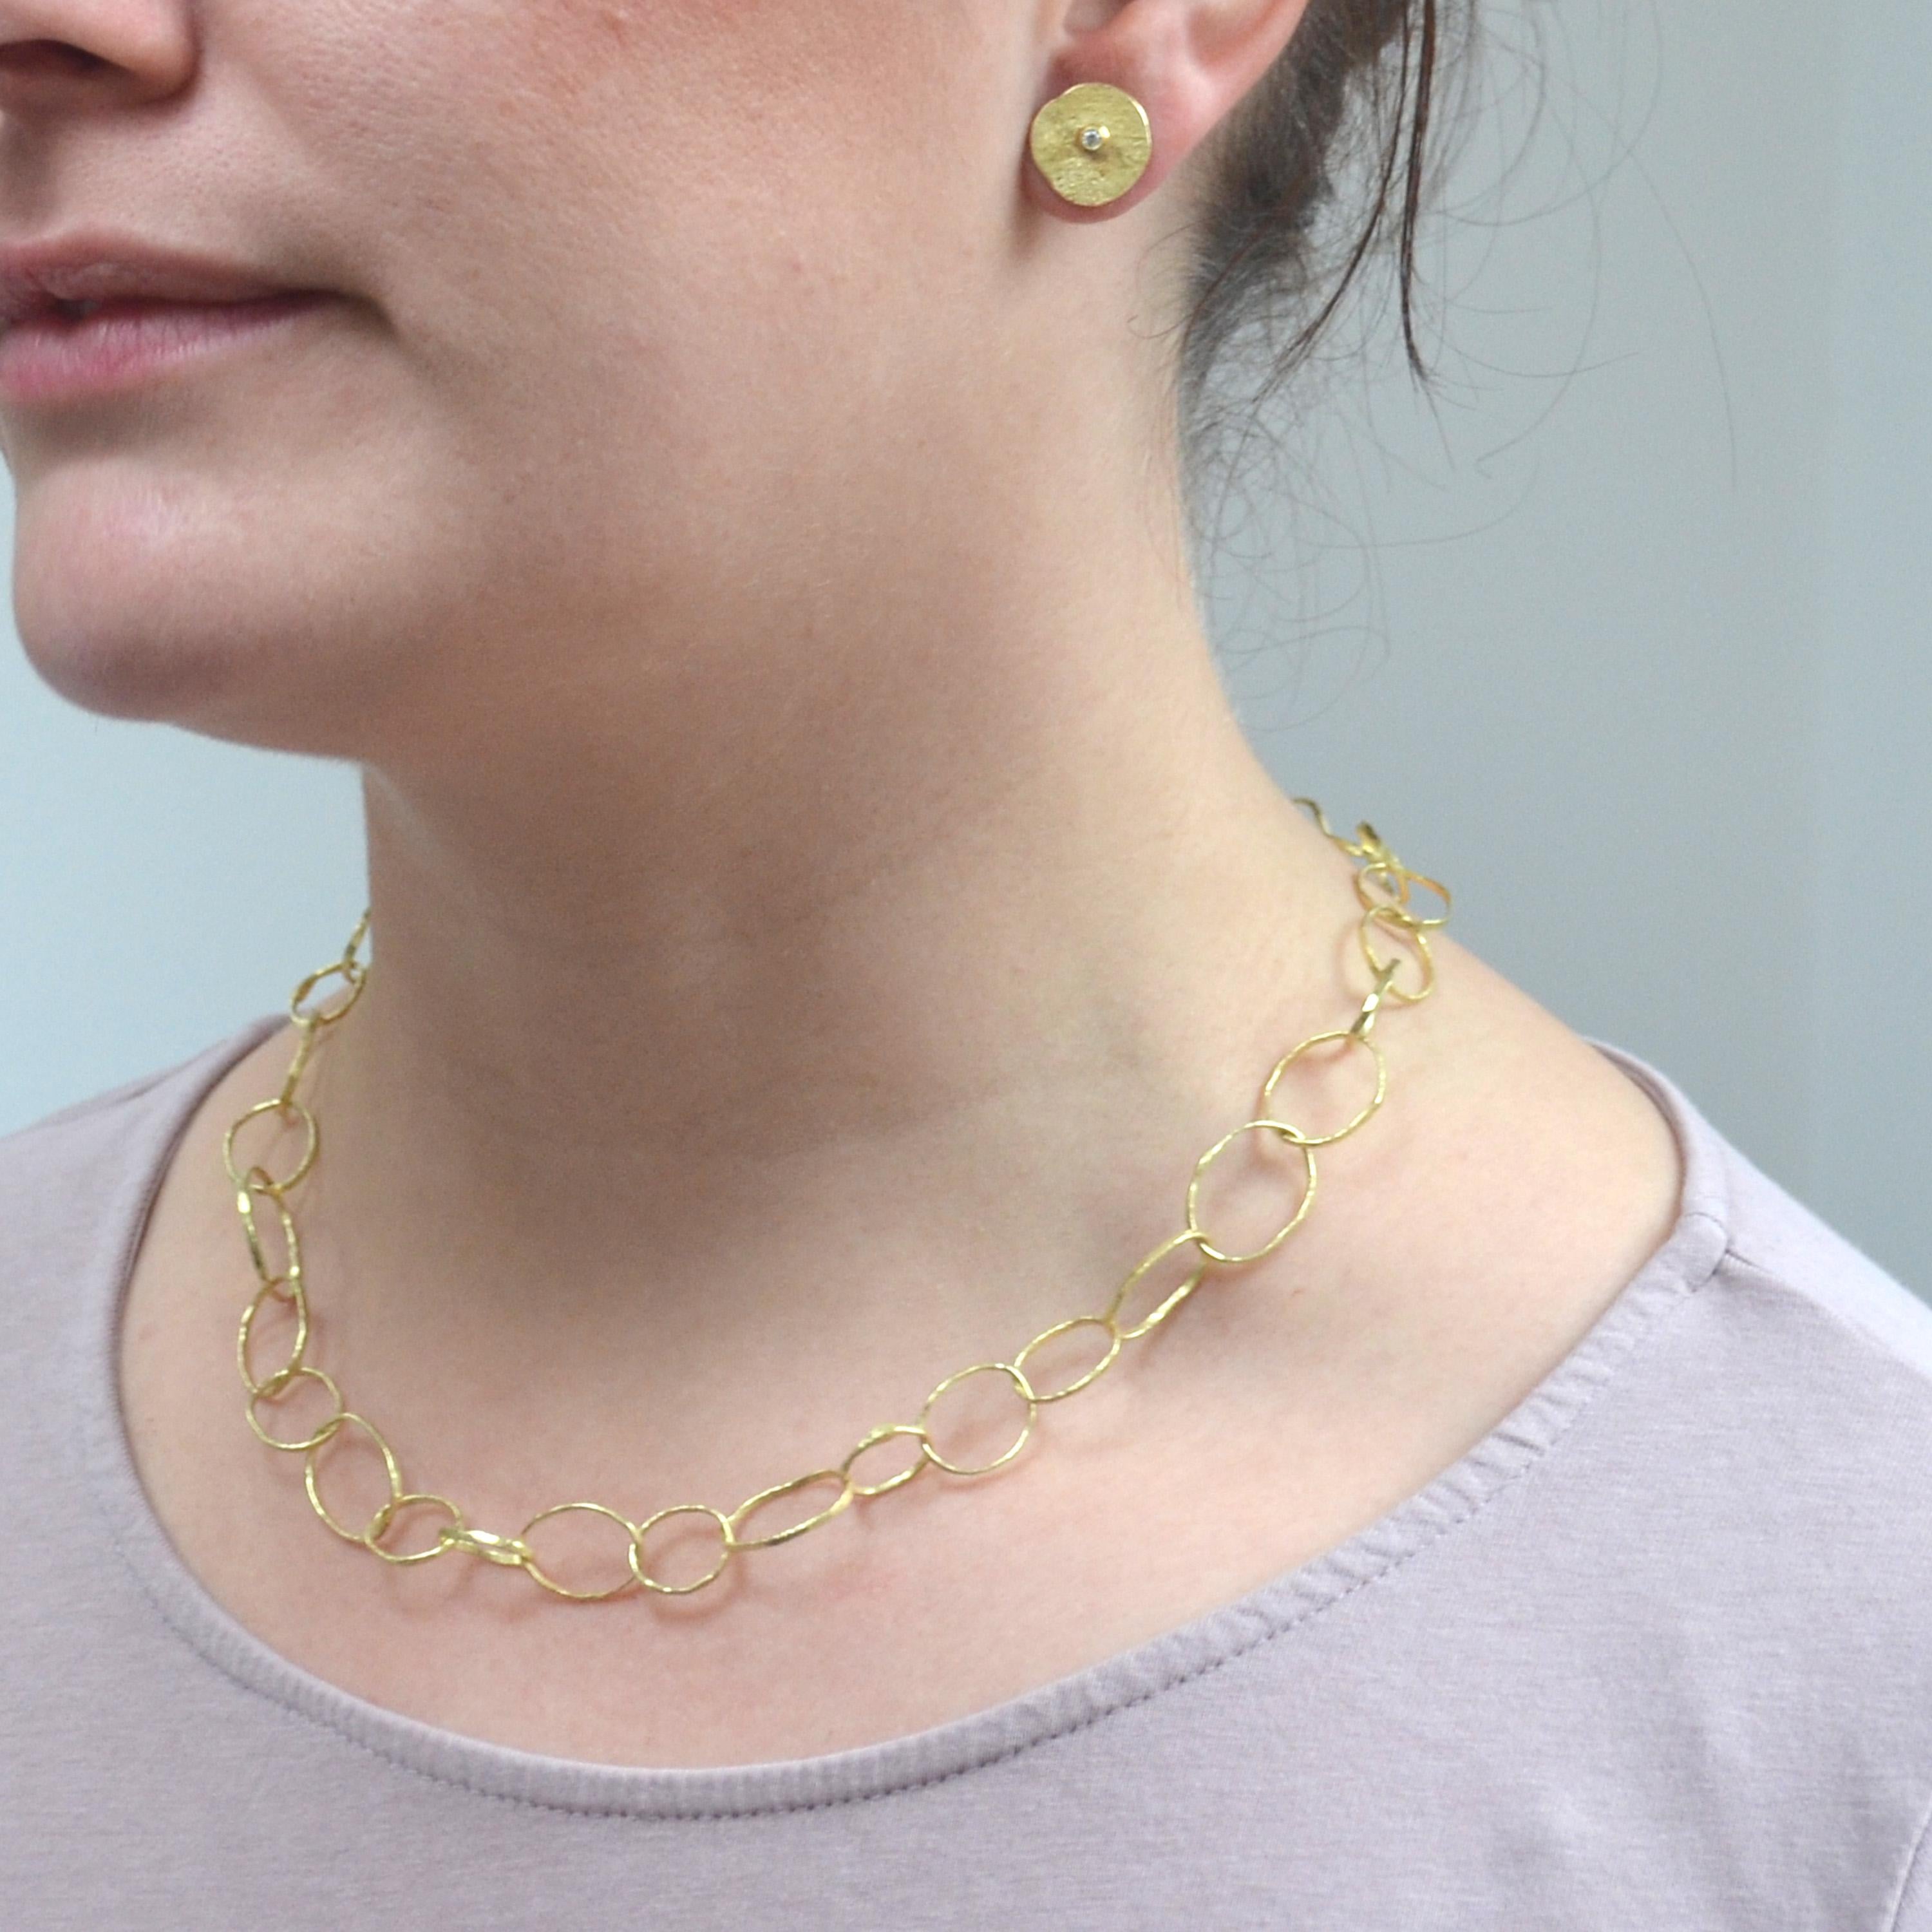 Contemporary Handmade 18 Karat Gold Organic Texture Chain Necklace by Disa Allsopp For Sale